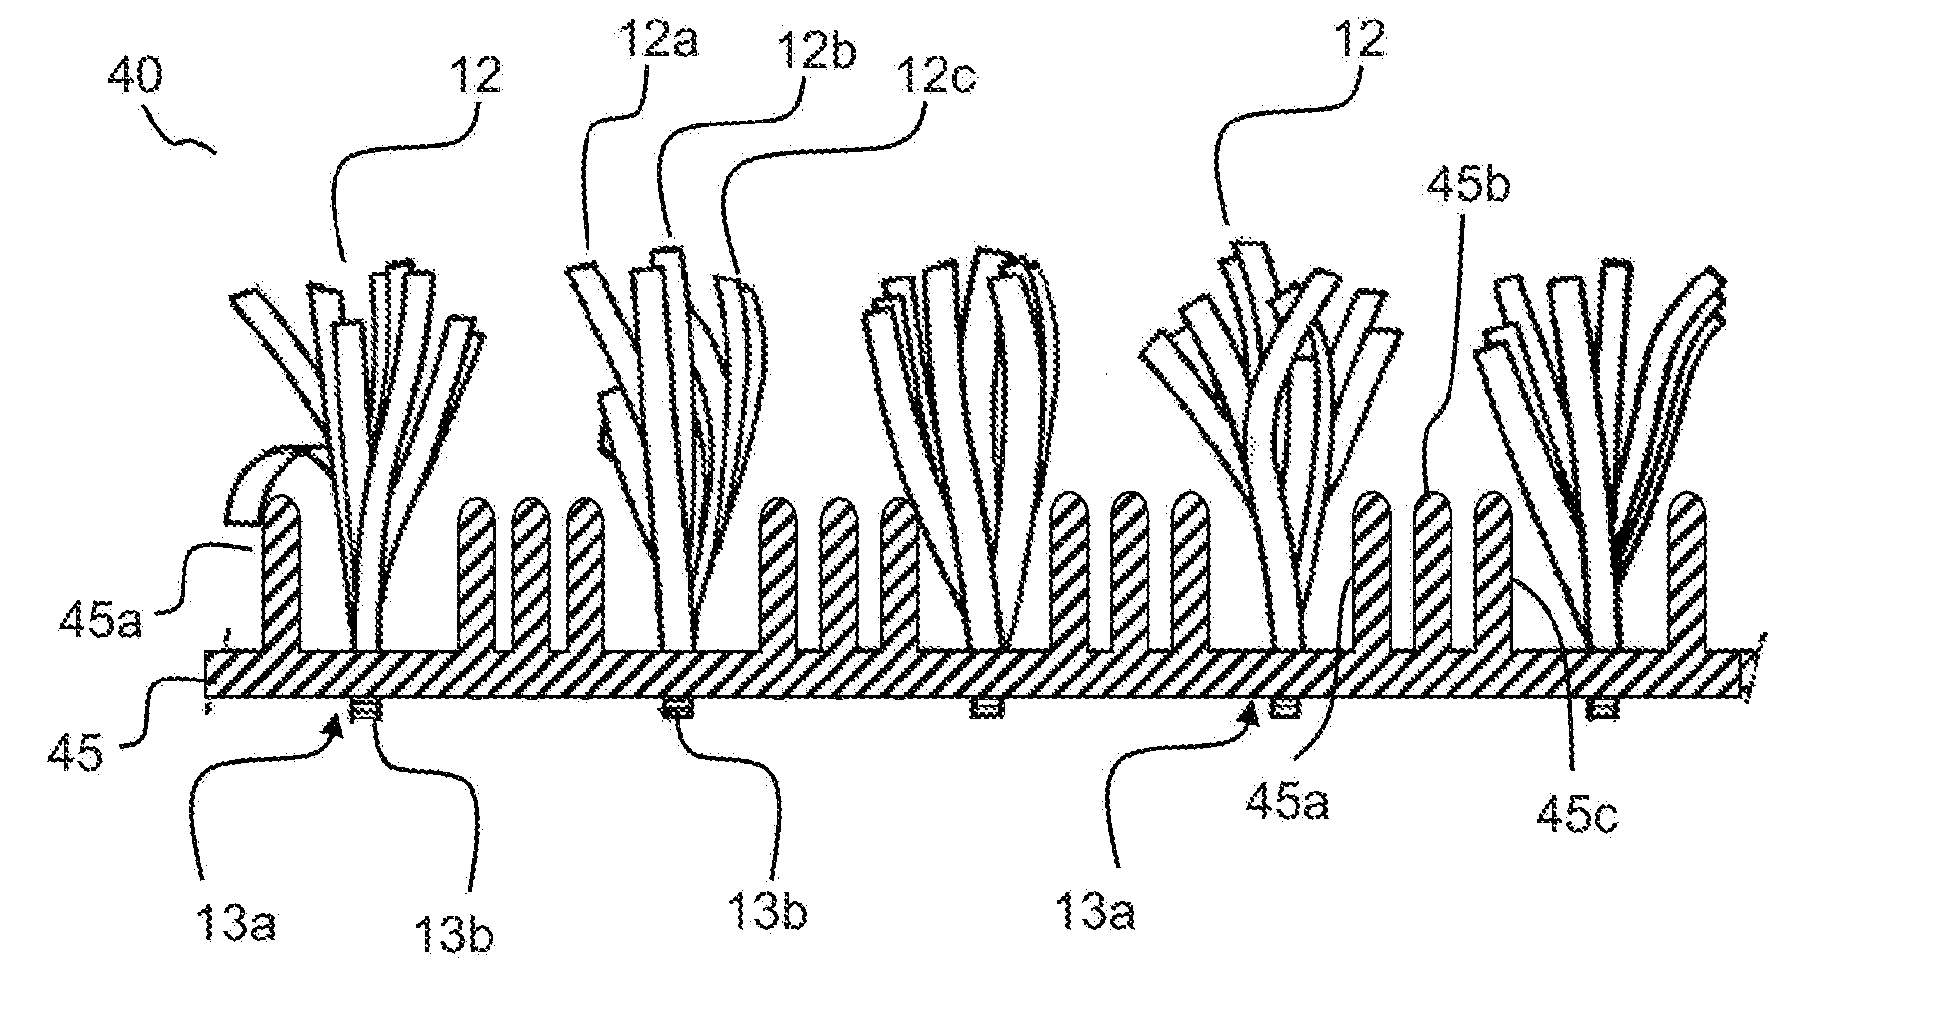 Substrate Element for an Artificial Grass Pitch